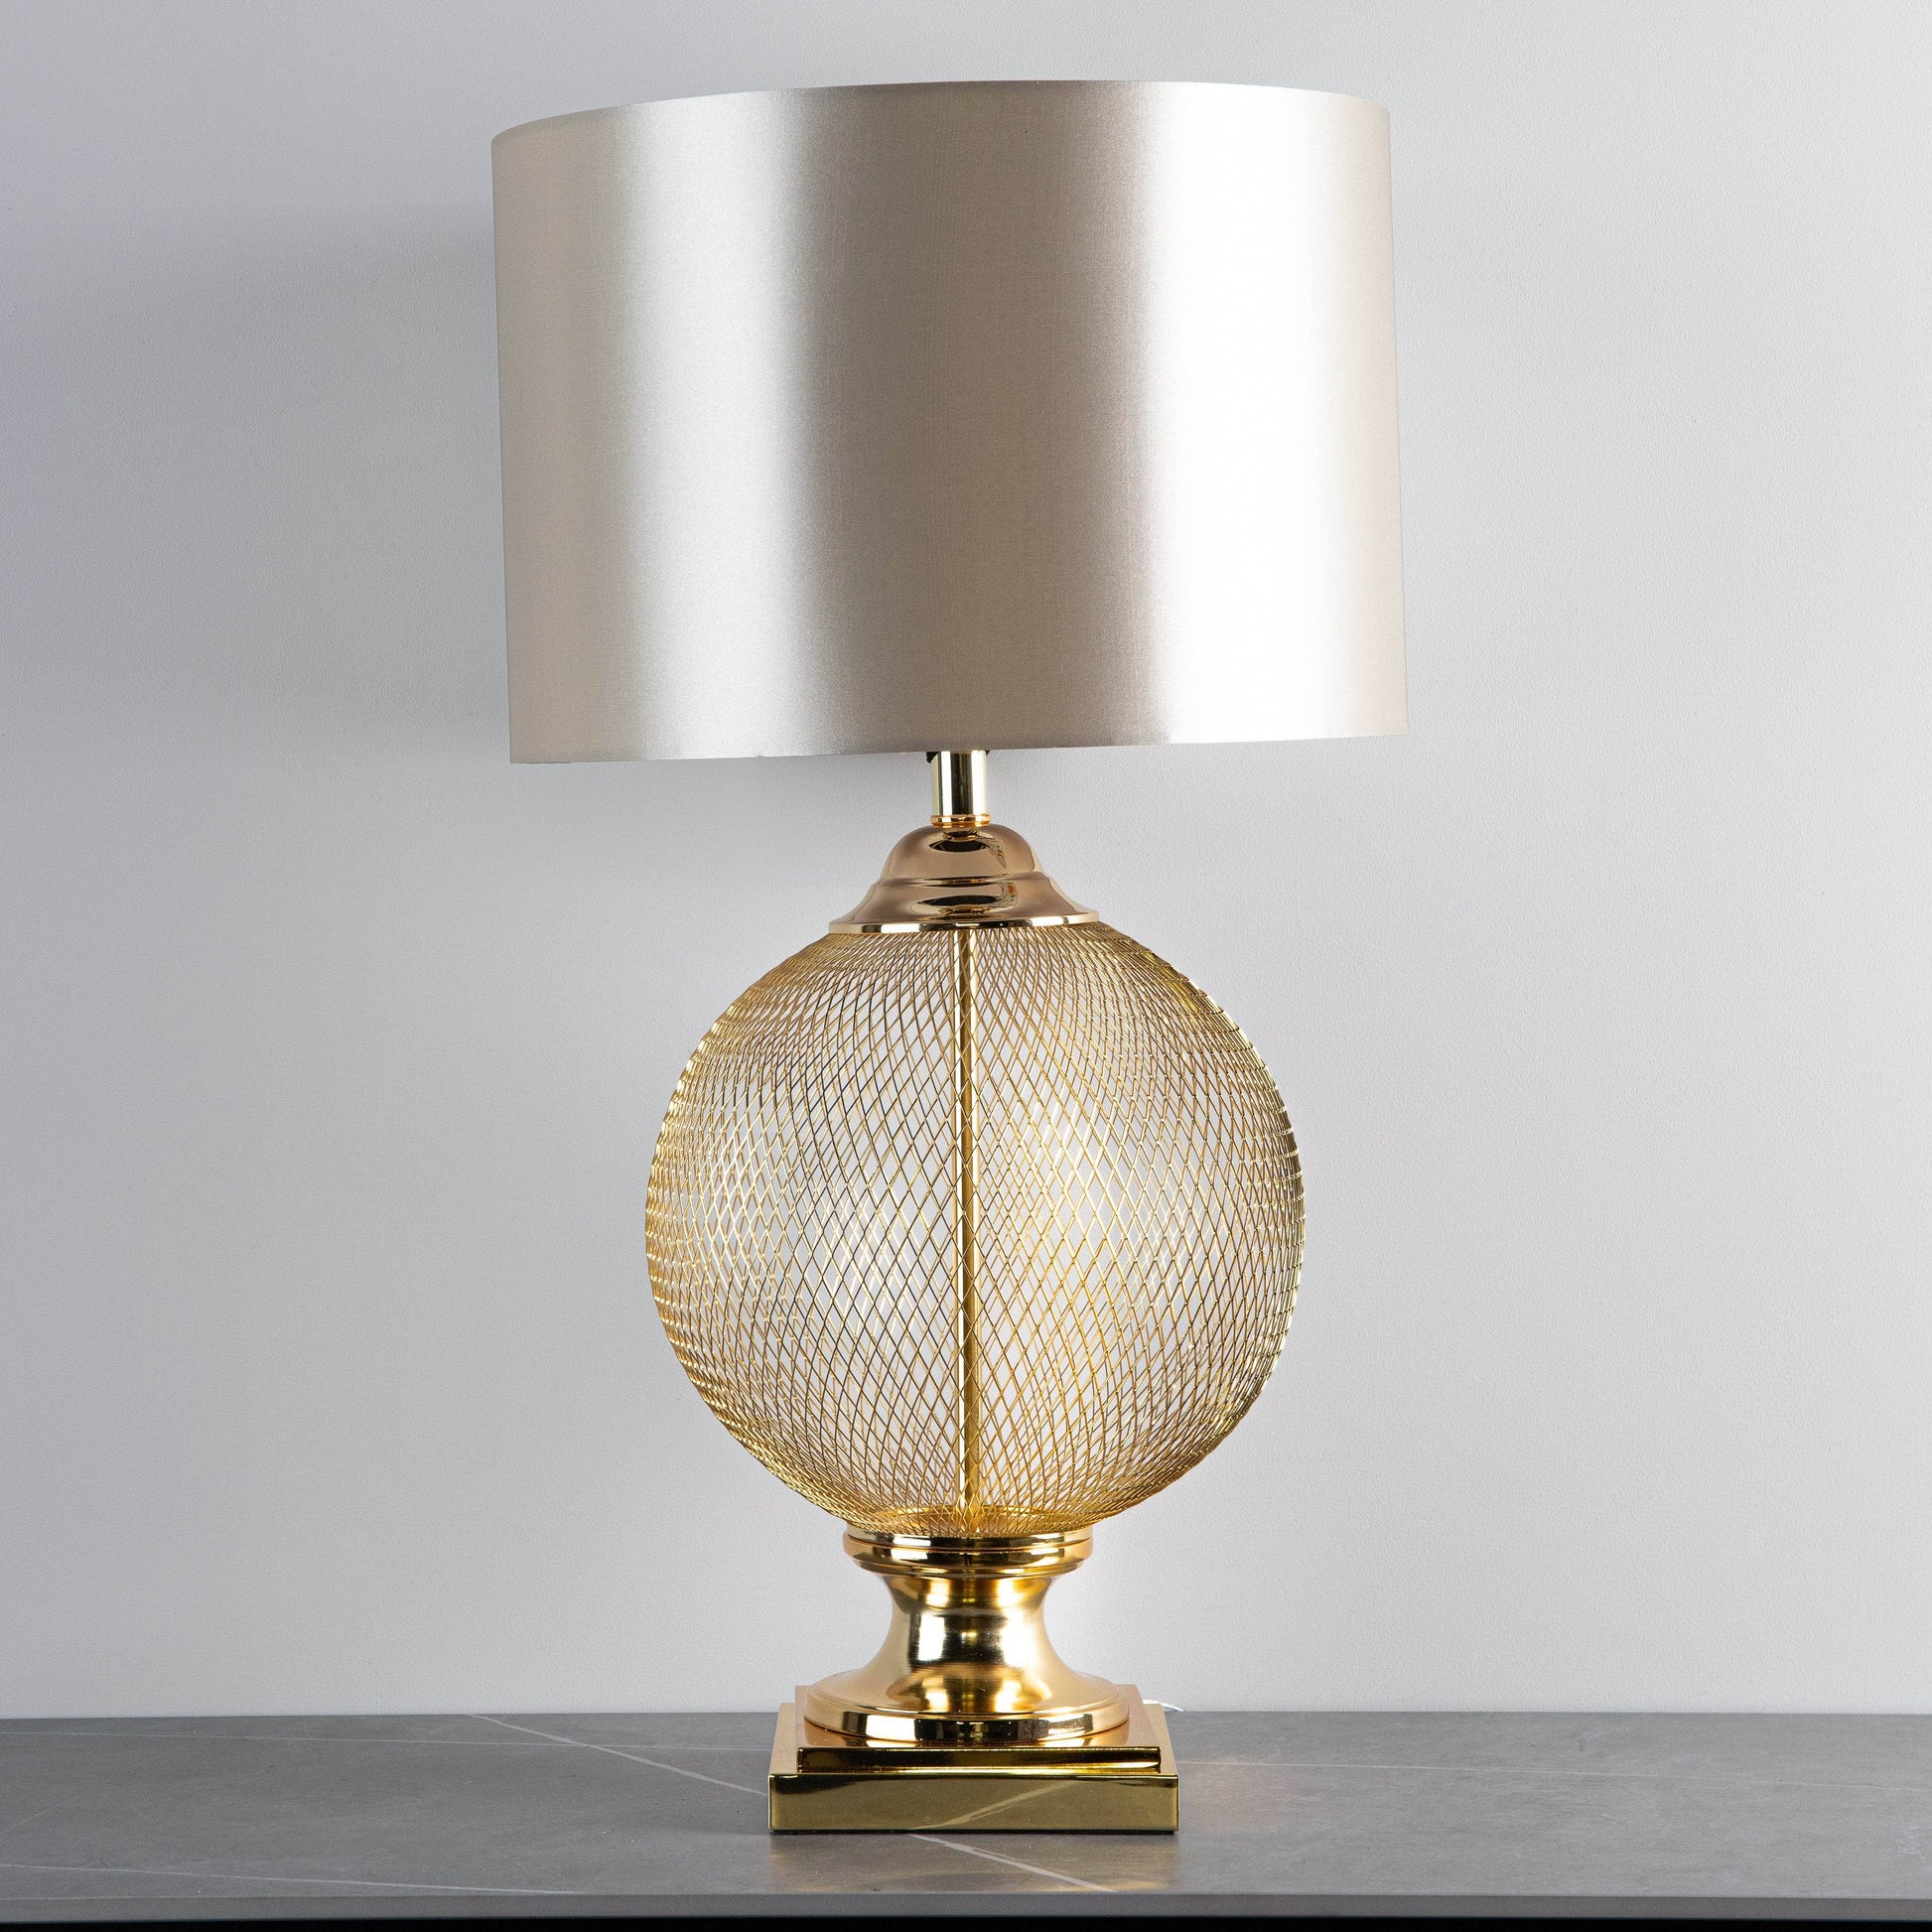 Lights  -  Gold Wire Mesh Table Lamp  -  60004272